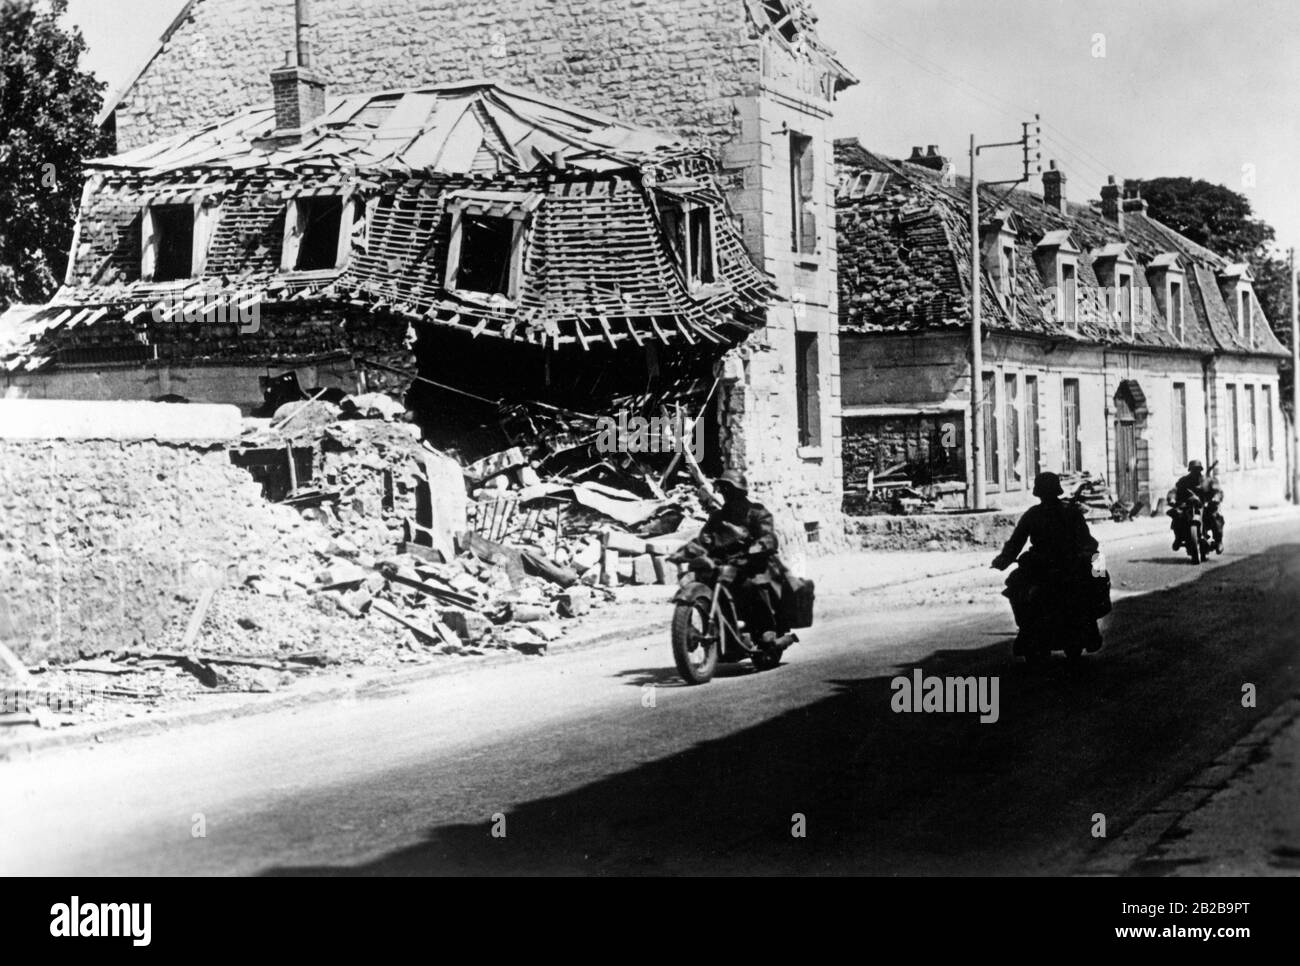 Advance between Paris and Compiegne in France. In the background in the rubble of a destroyed house. Soldiers are riding their motorcycles on the road. Stock Photo